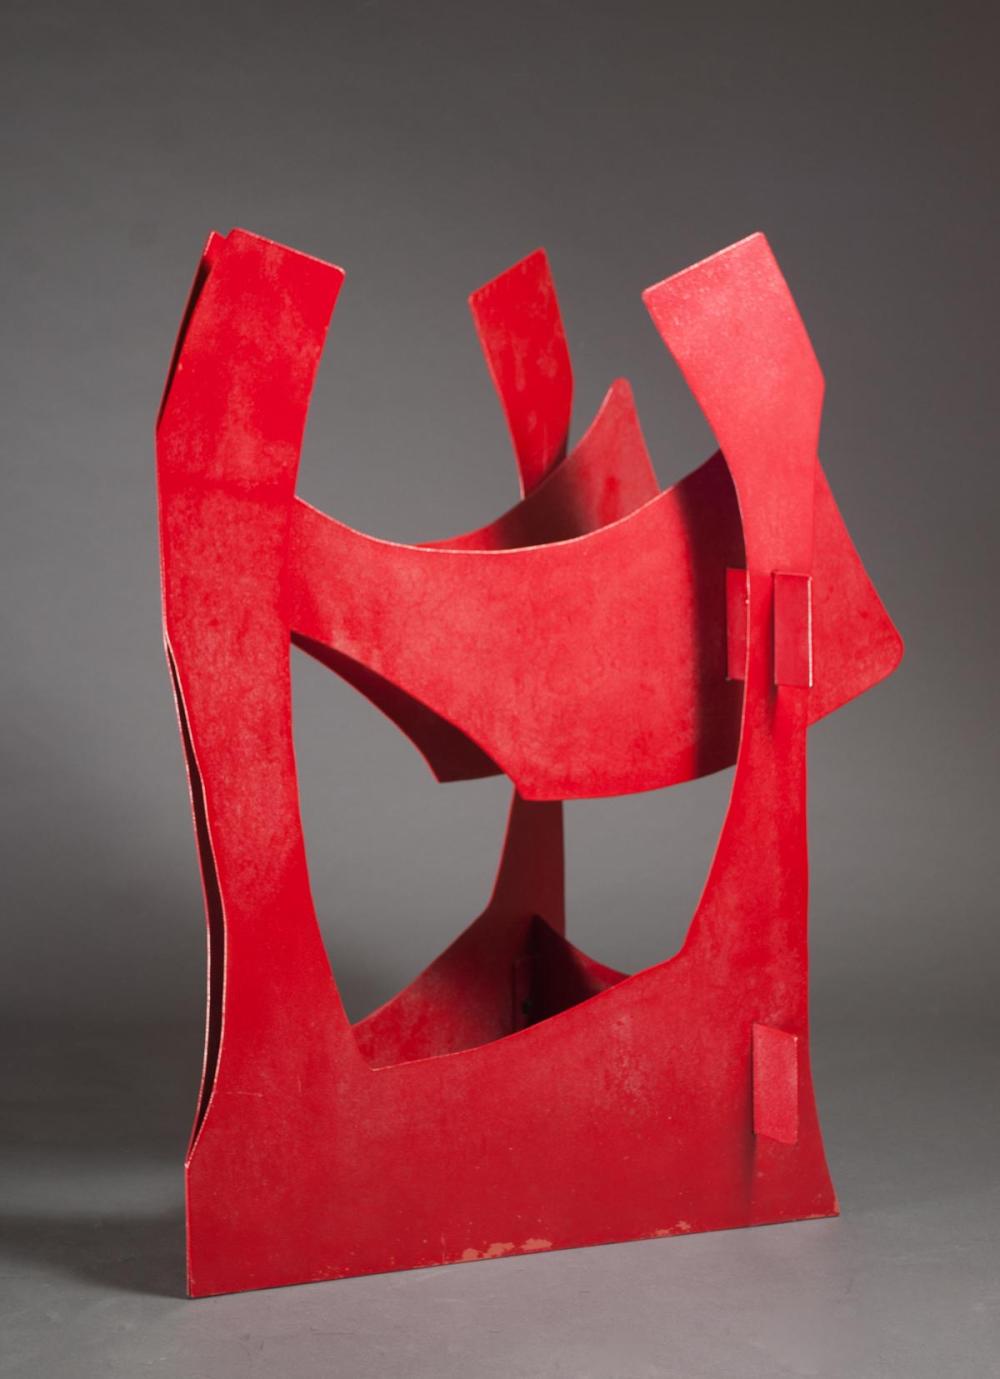 RED PAINTED IRON SCULPTURE ABSTRACT 315d60